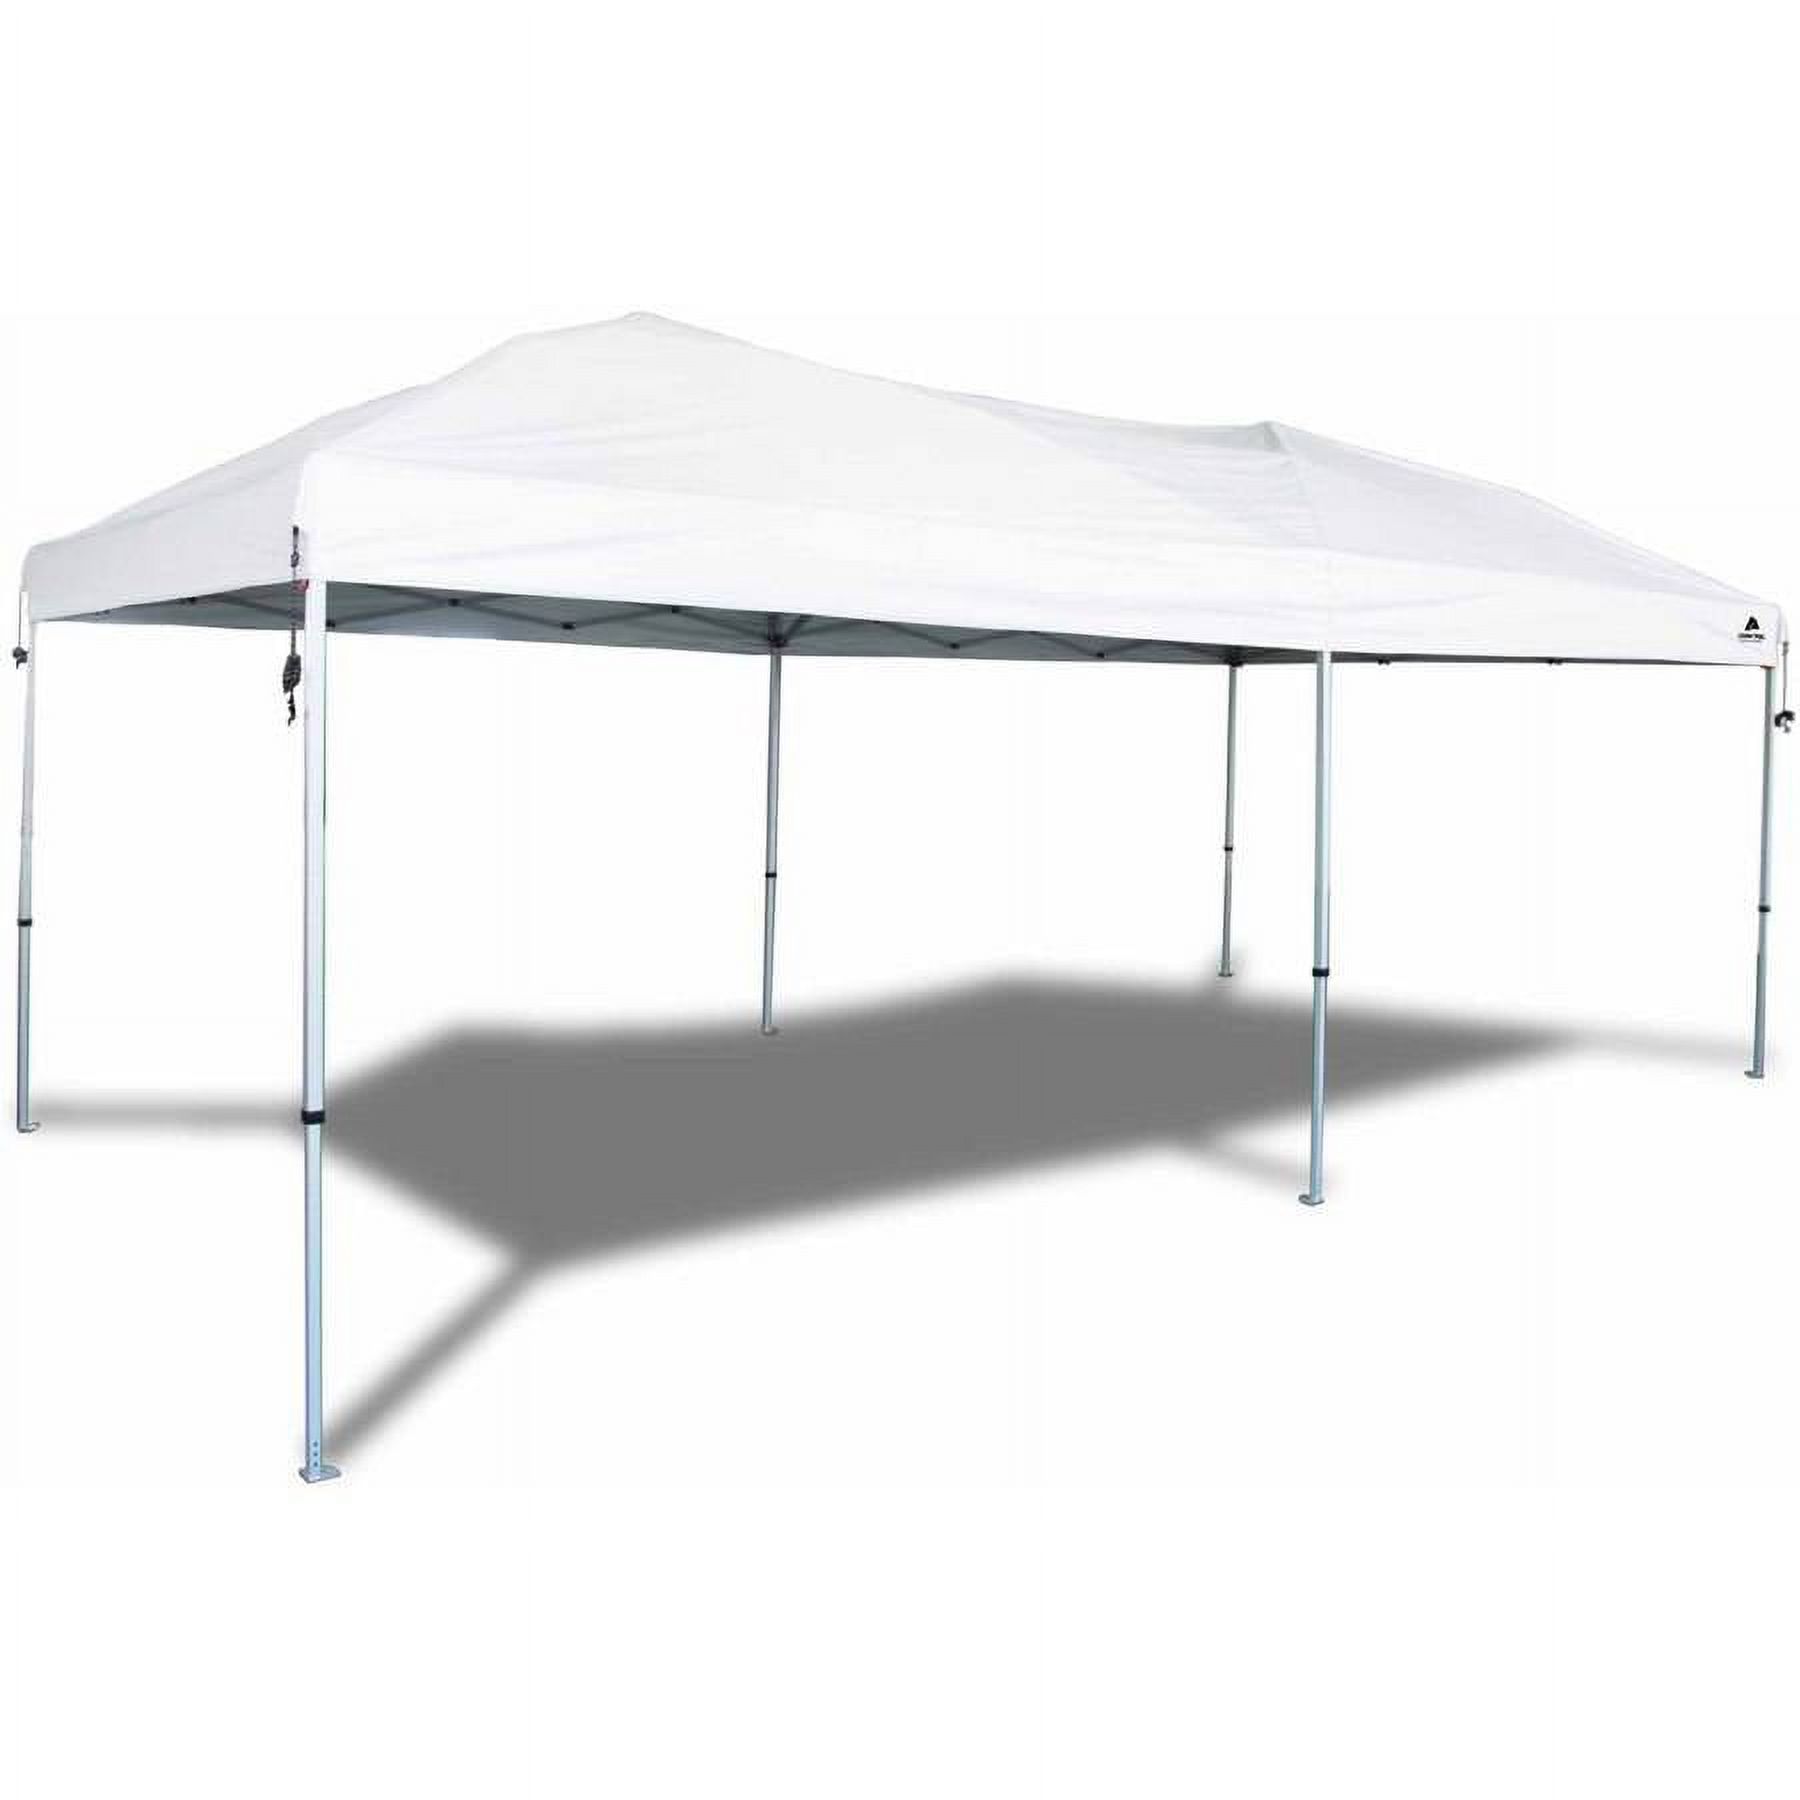 Ozark Trail 20' x 10' Straight Leg Outdoor Easy Pop-up Canopy, White - image 3 of 10